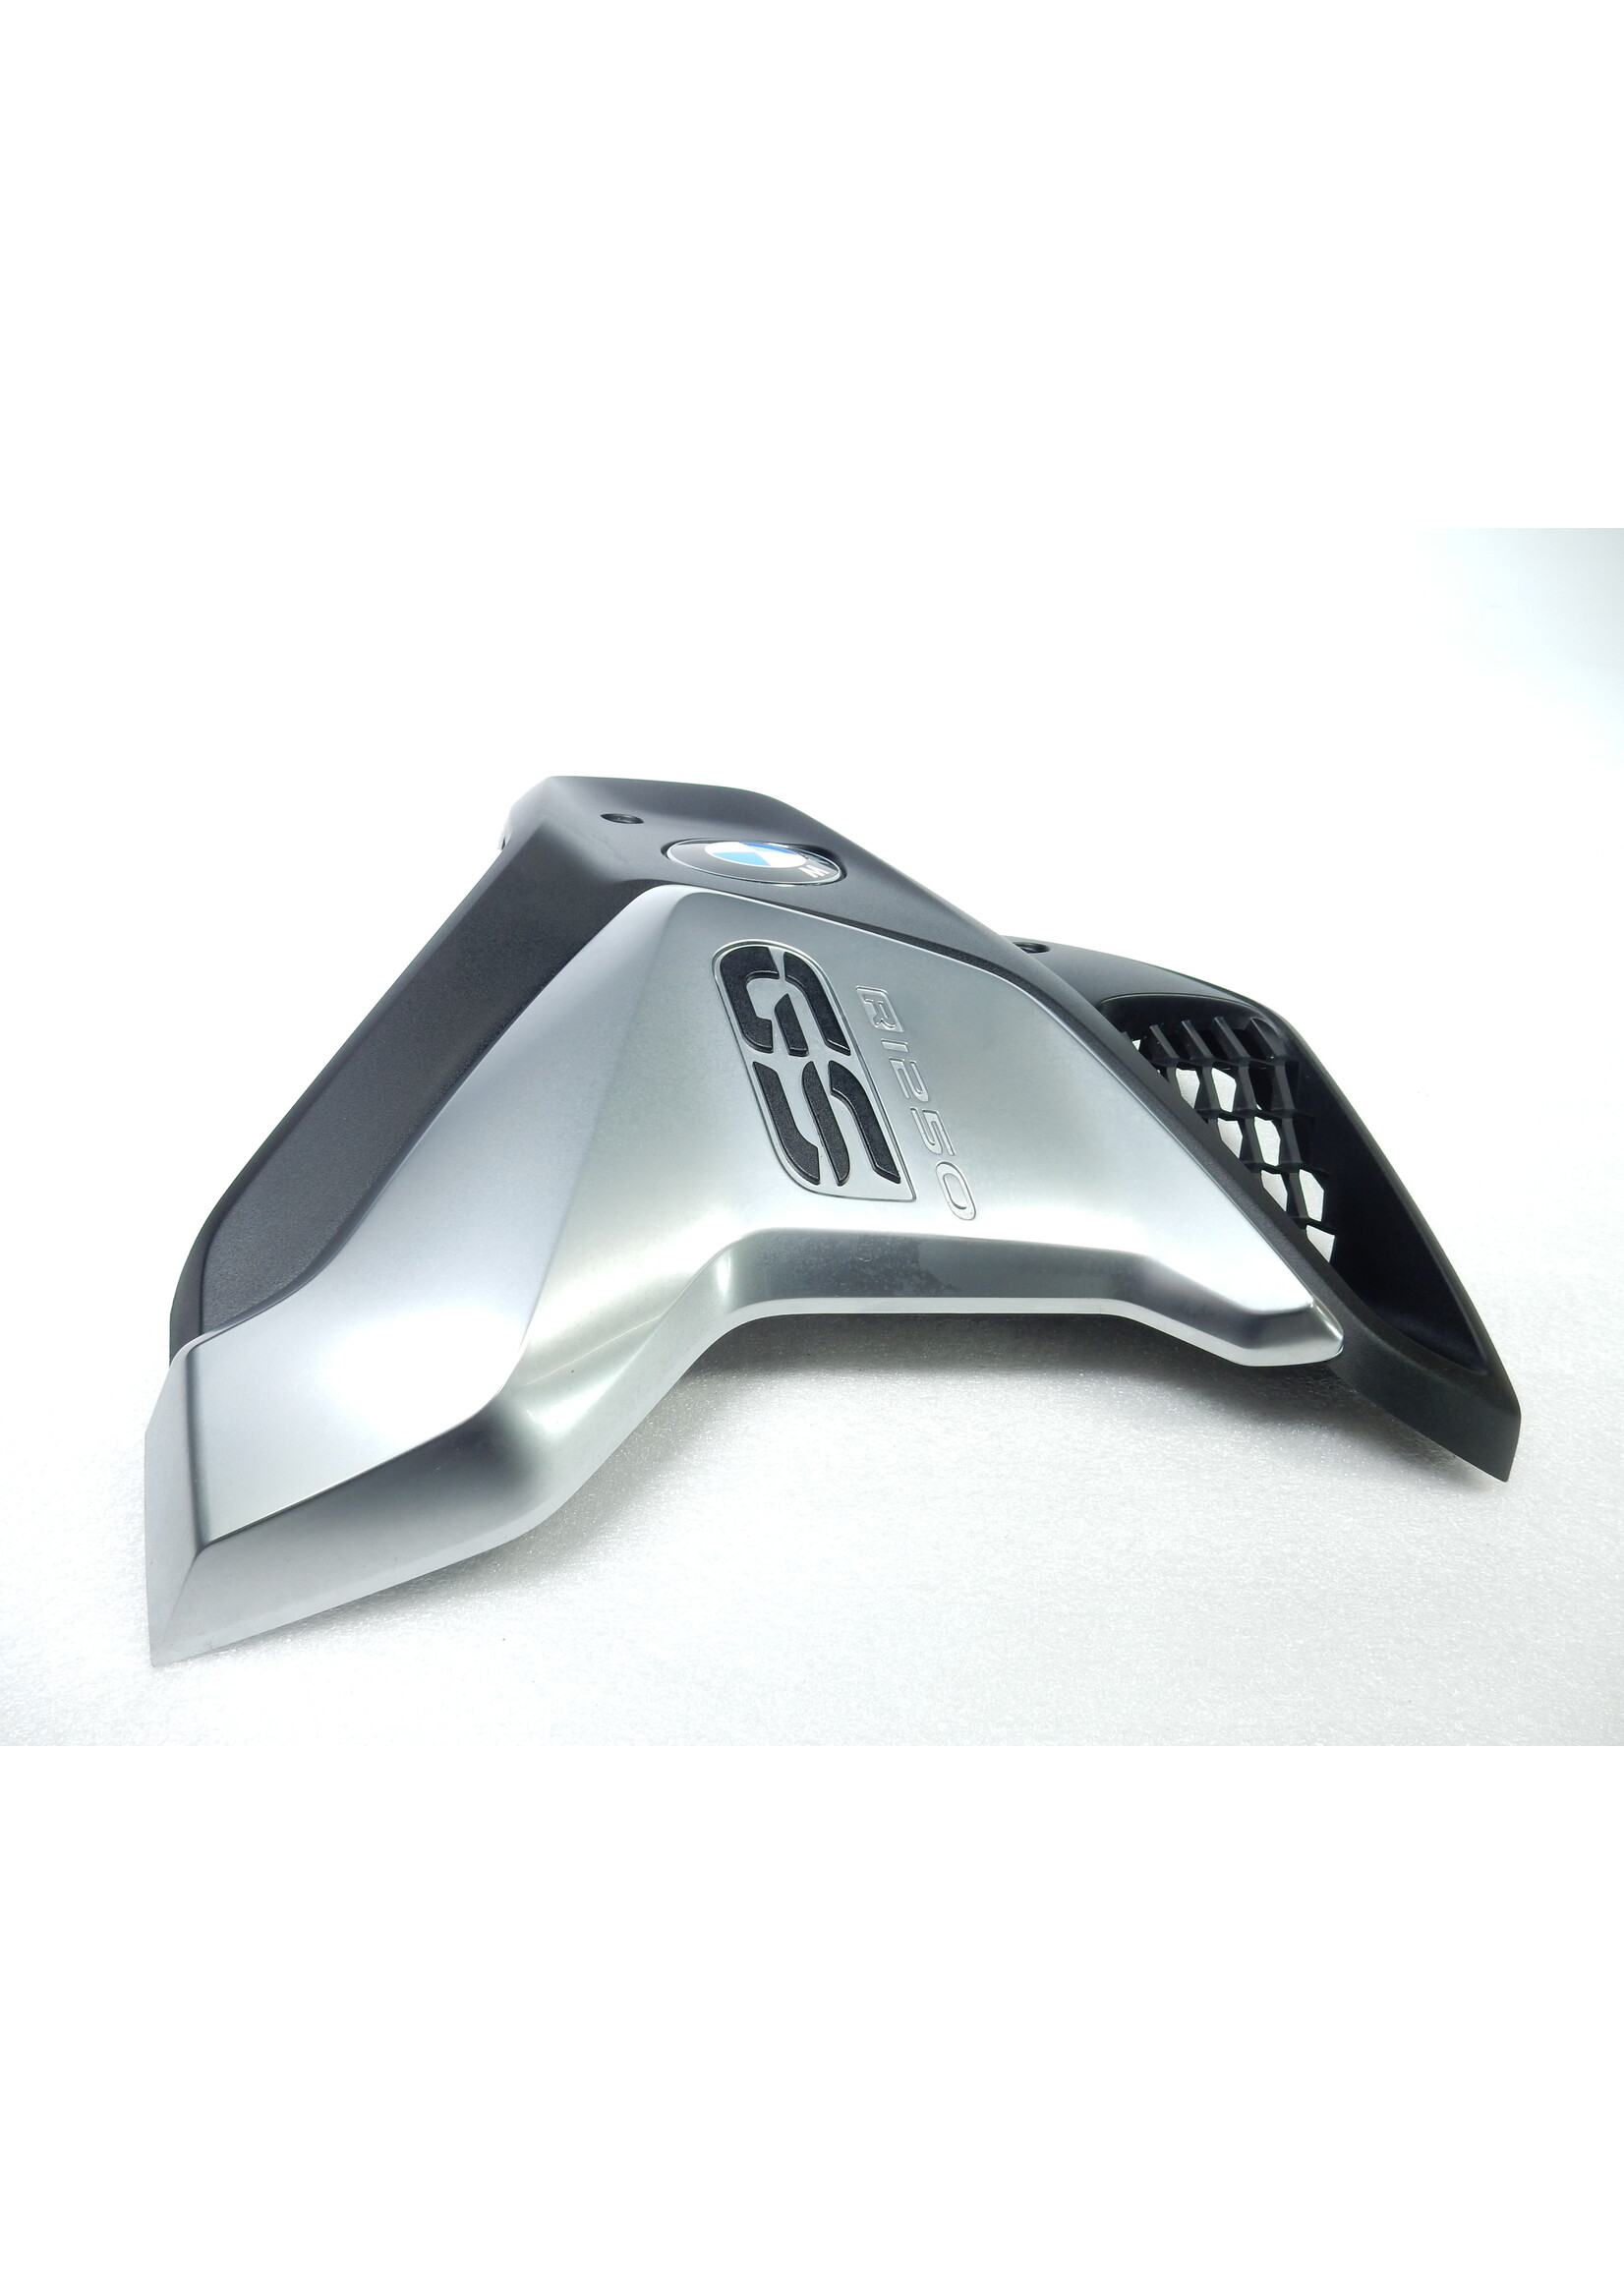 BMW BMW R 1250 GS Cover, intake snorkel, right / Plaque D=70MM / Radiator cowl with inscription right / 46638556656 / 51147721222 / 46638392882